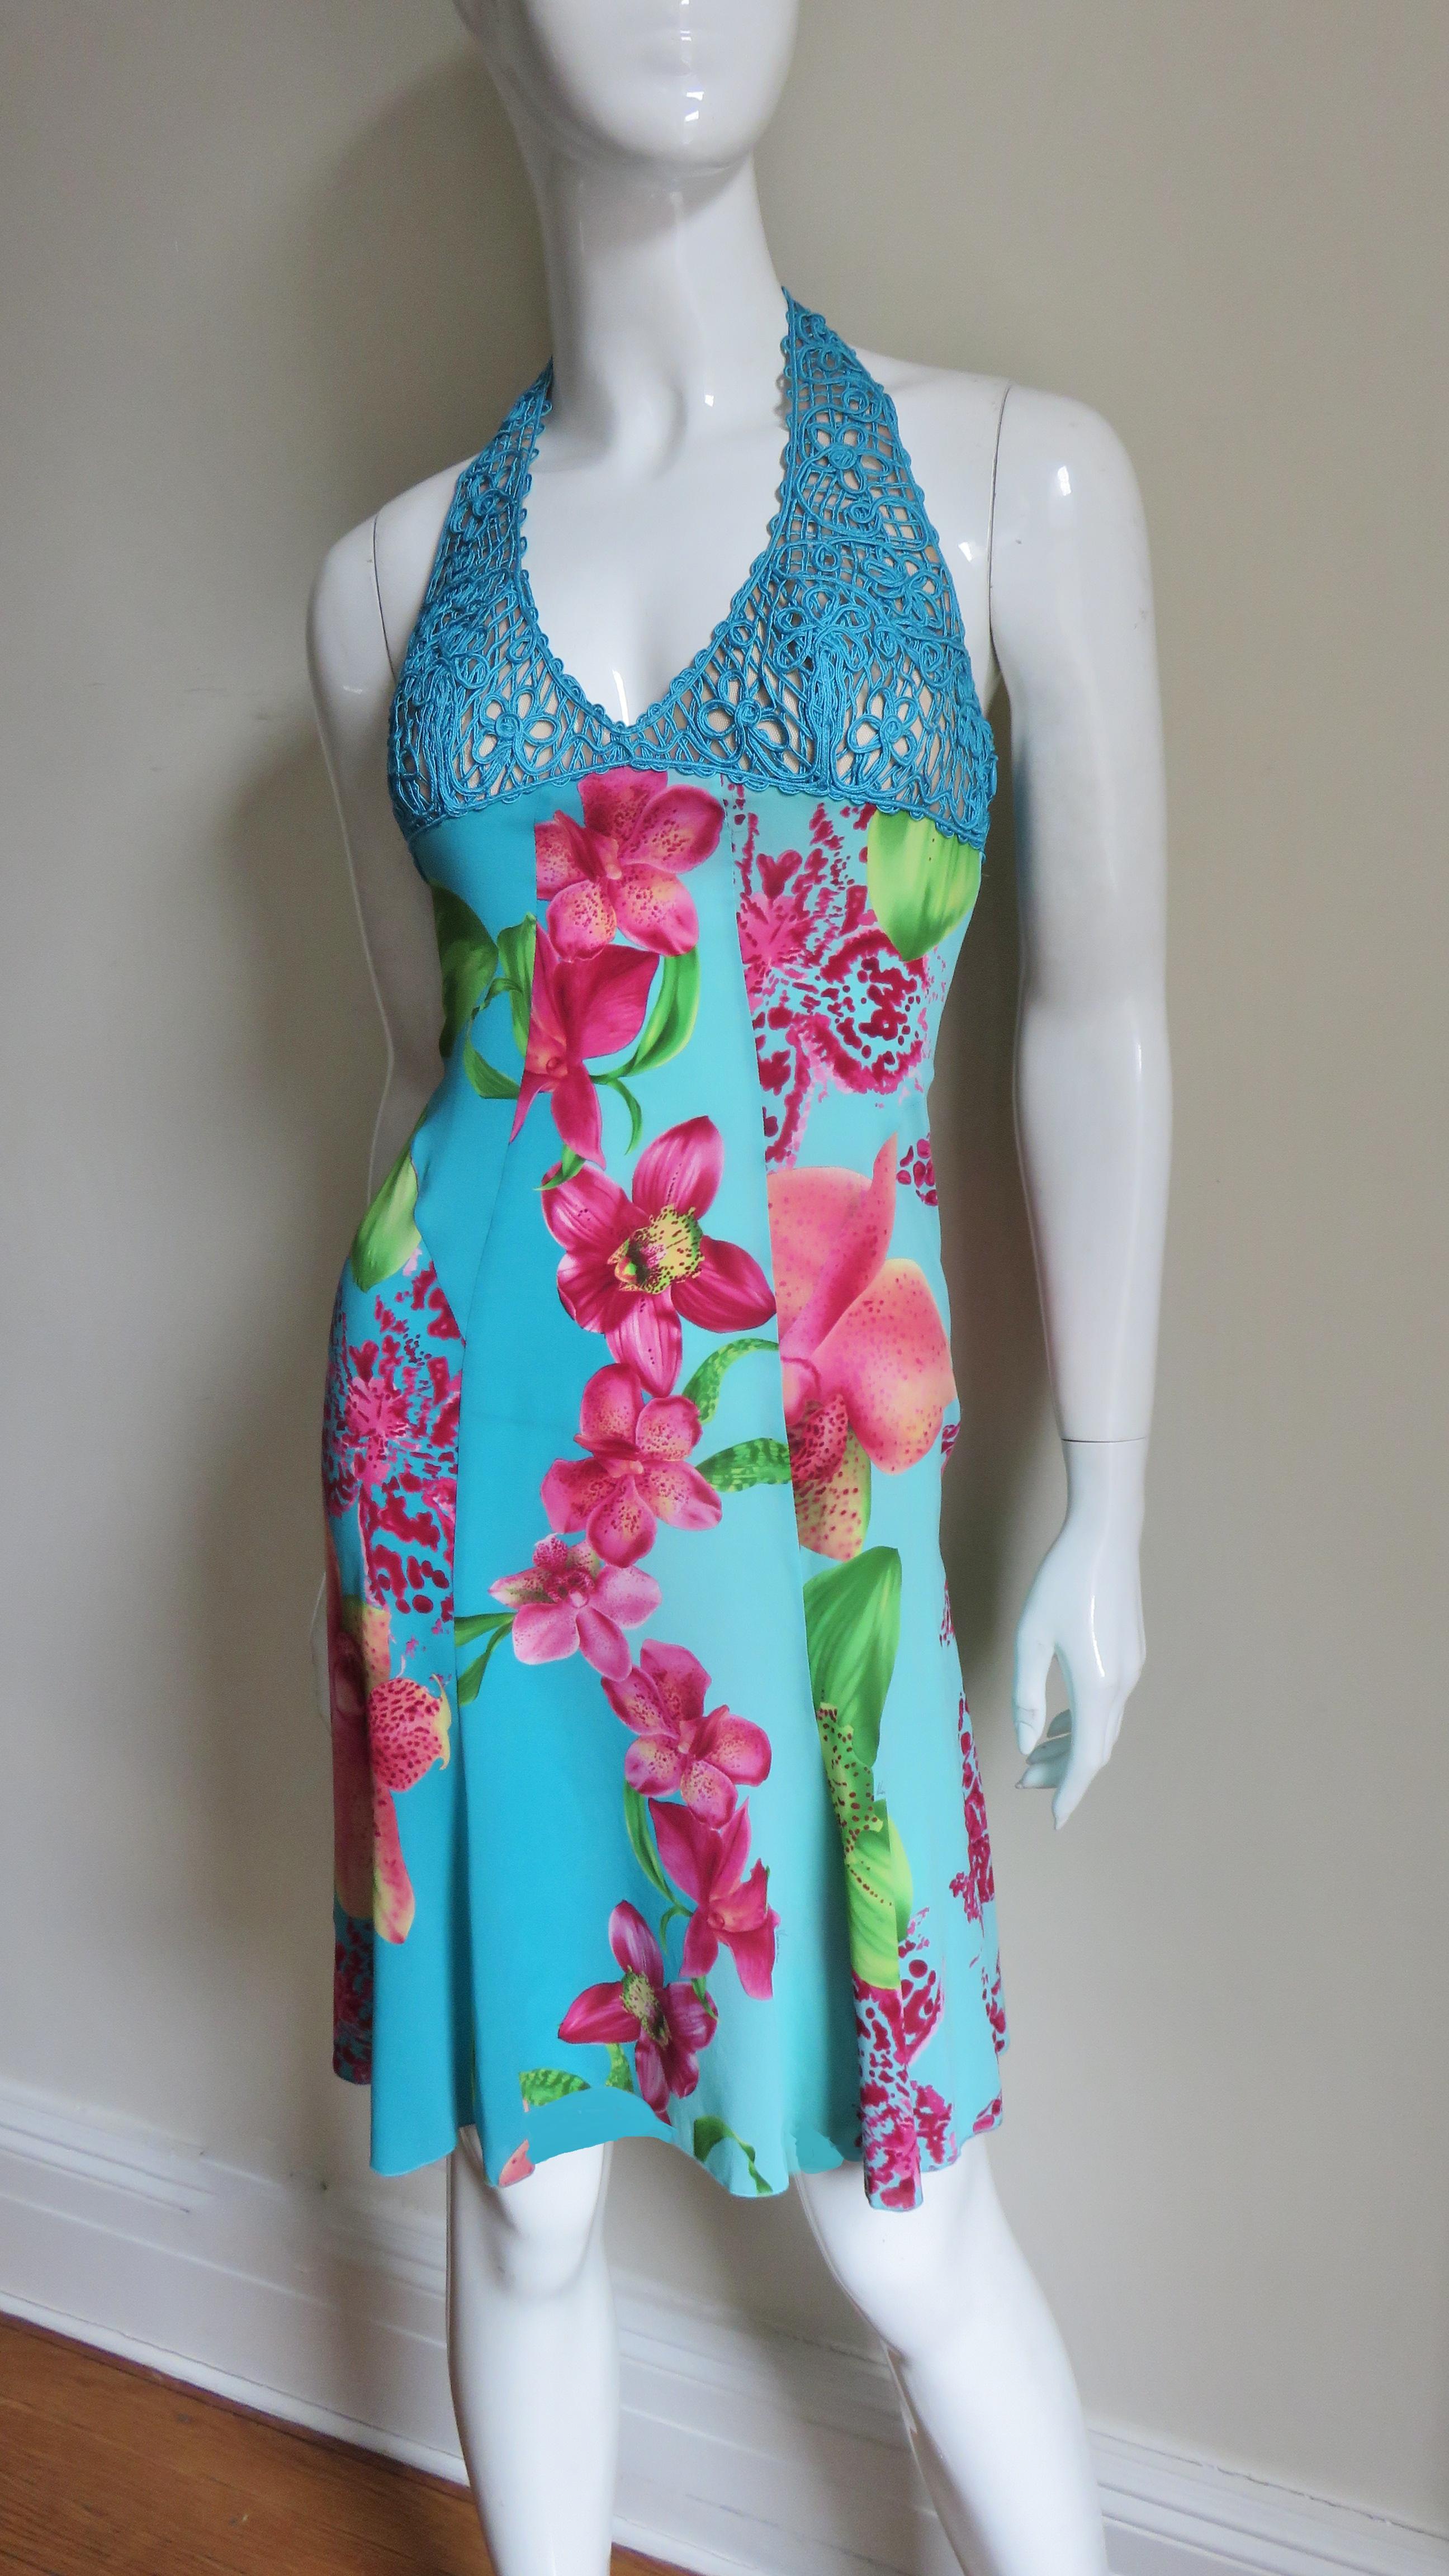 A fabulous fine stretch silk halter dress from Versace with a colorful pink lily print on a turquoise background. The halter neck and bust area are comprised of intricate silk cord forming a flower pattern. The body of the dress is fitted with 4